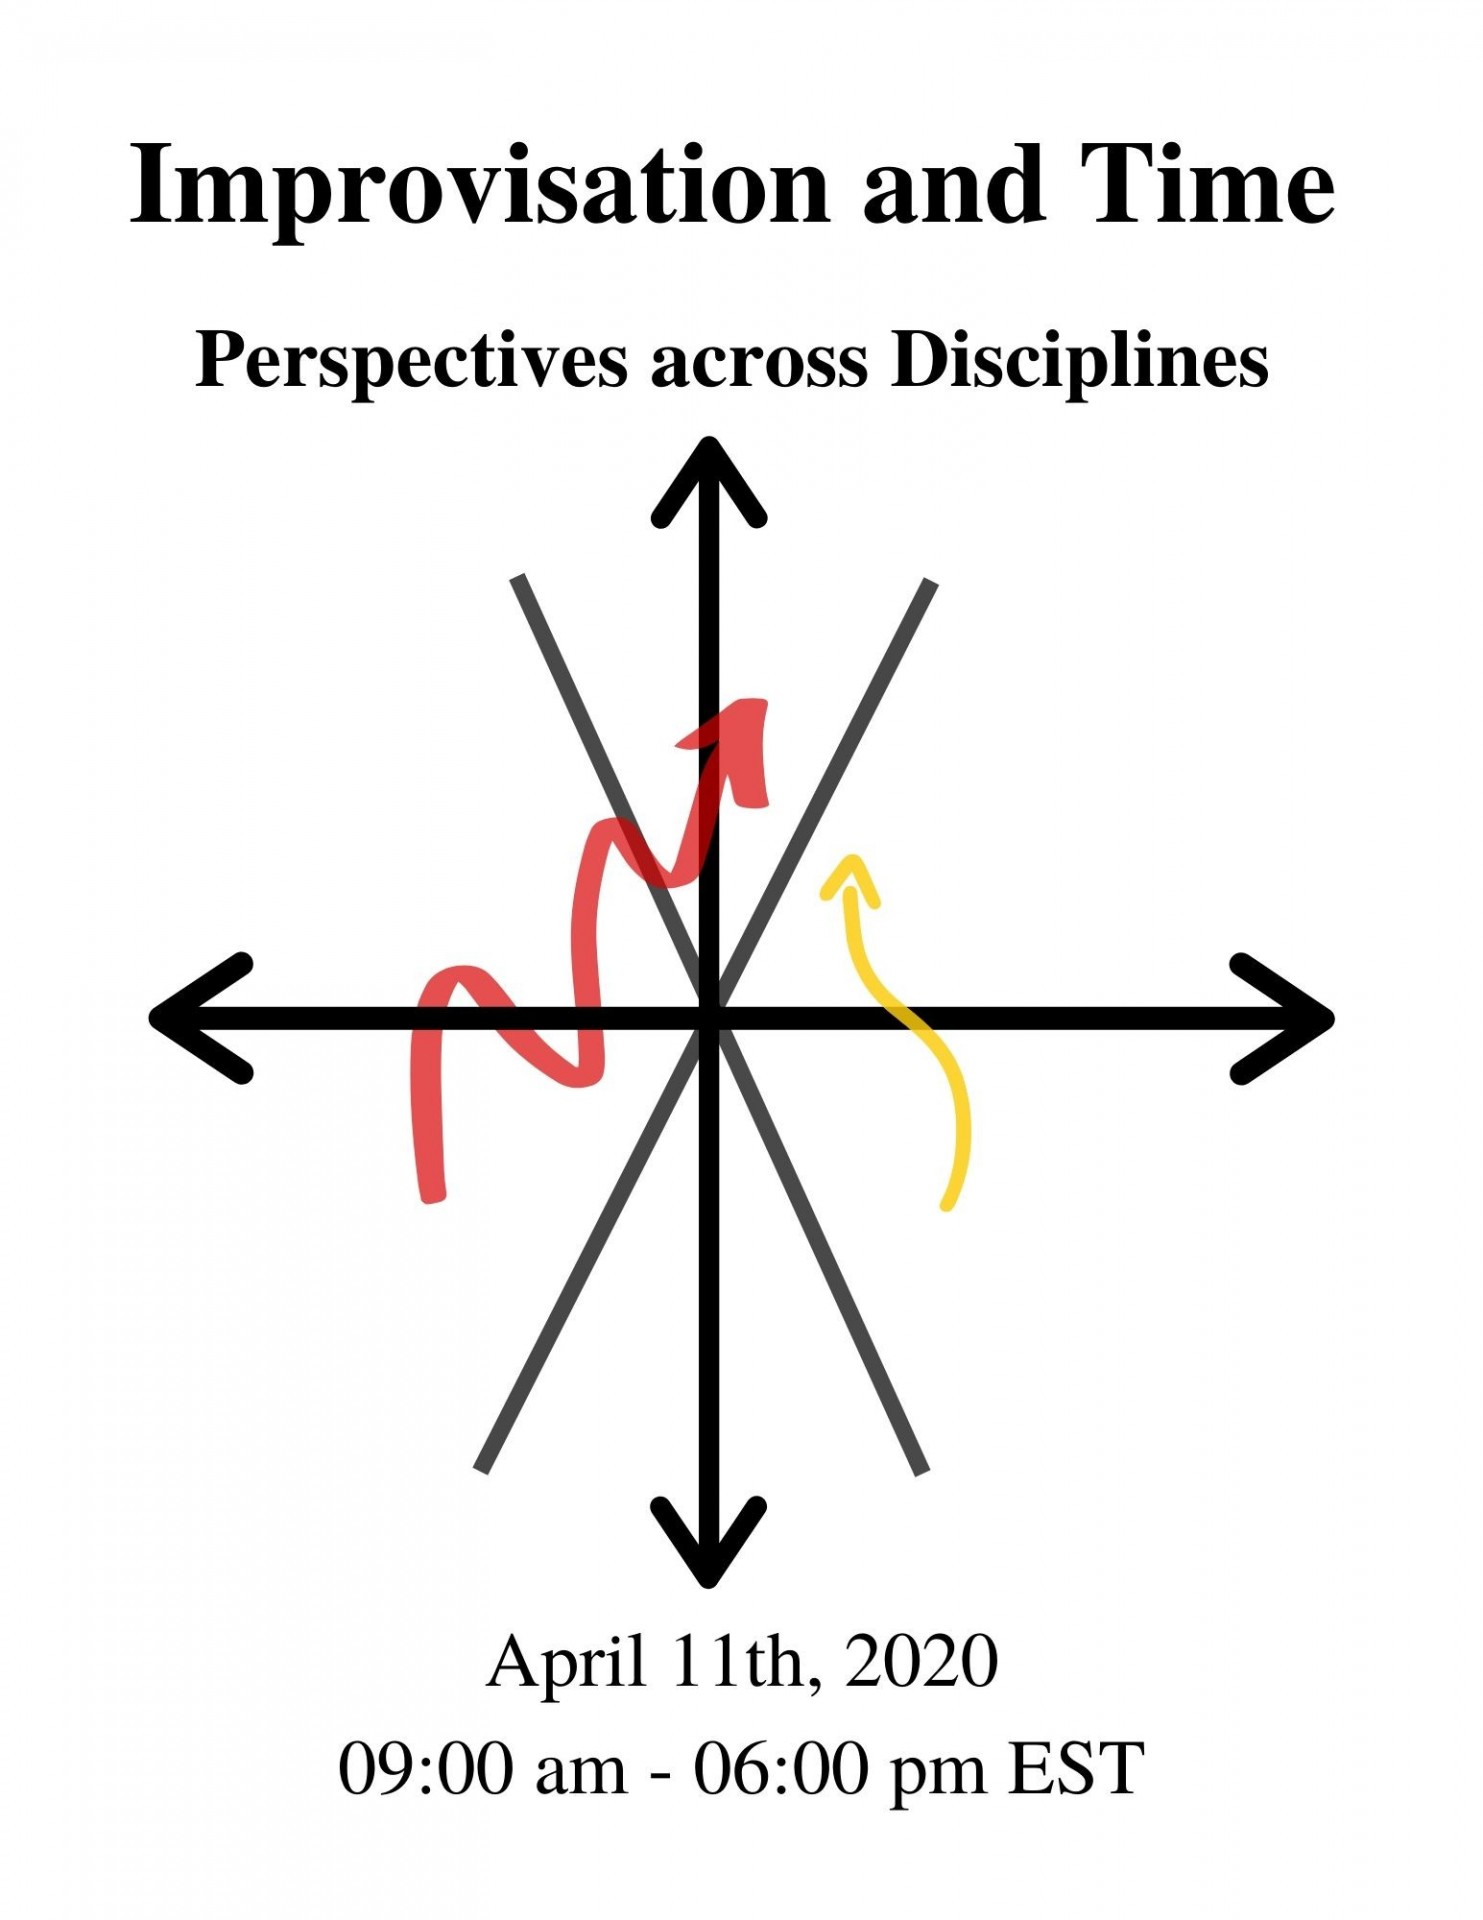 Poster for Online Conference "Improvisation and Time: Perspectives across Disciplines"